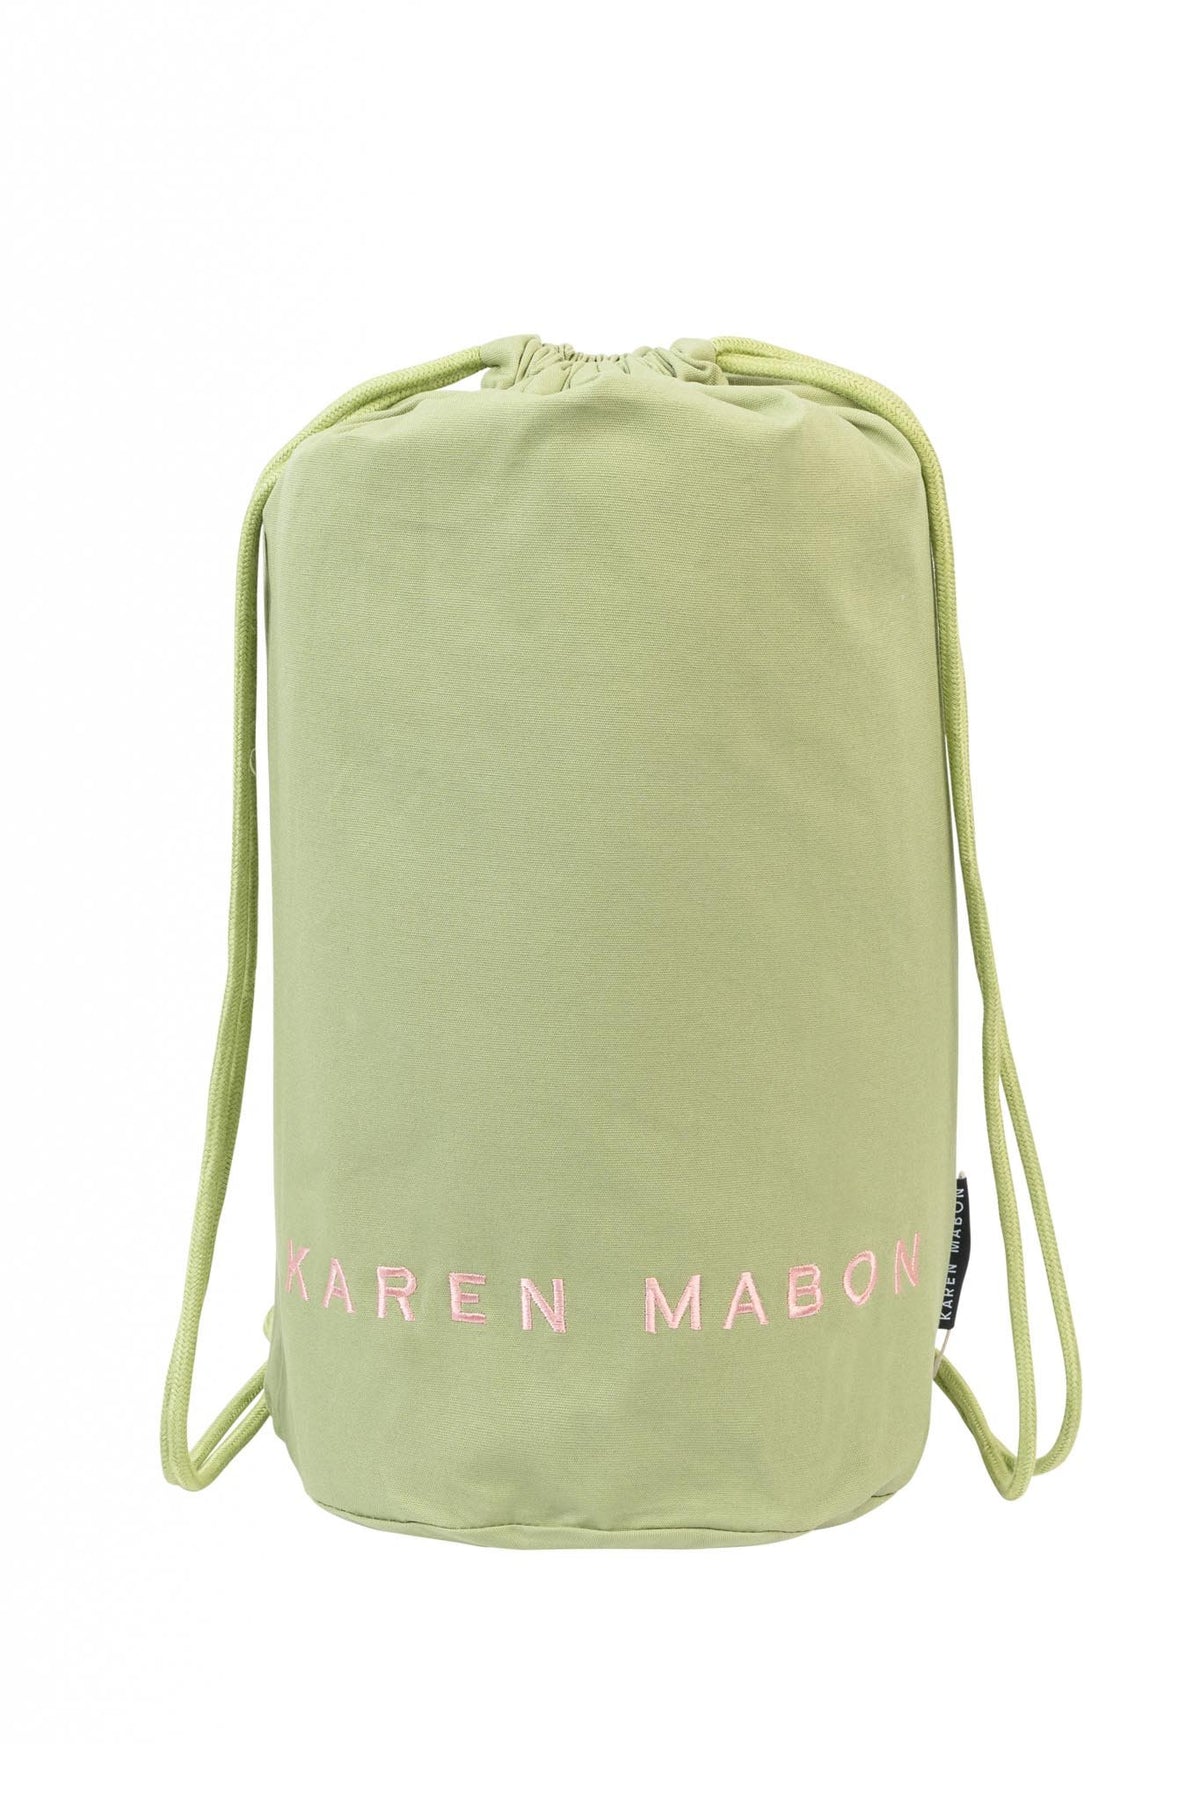 Pistachio green duffel bag with embroidered Karen Mabon logo in pink